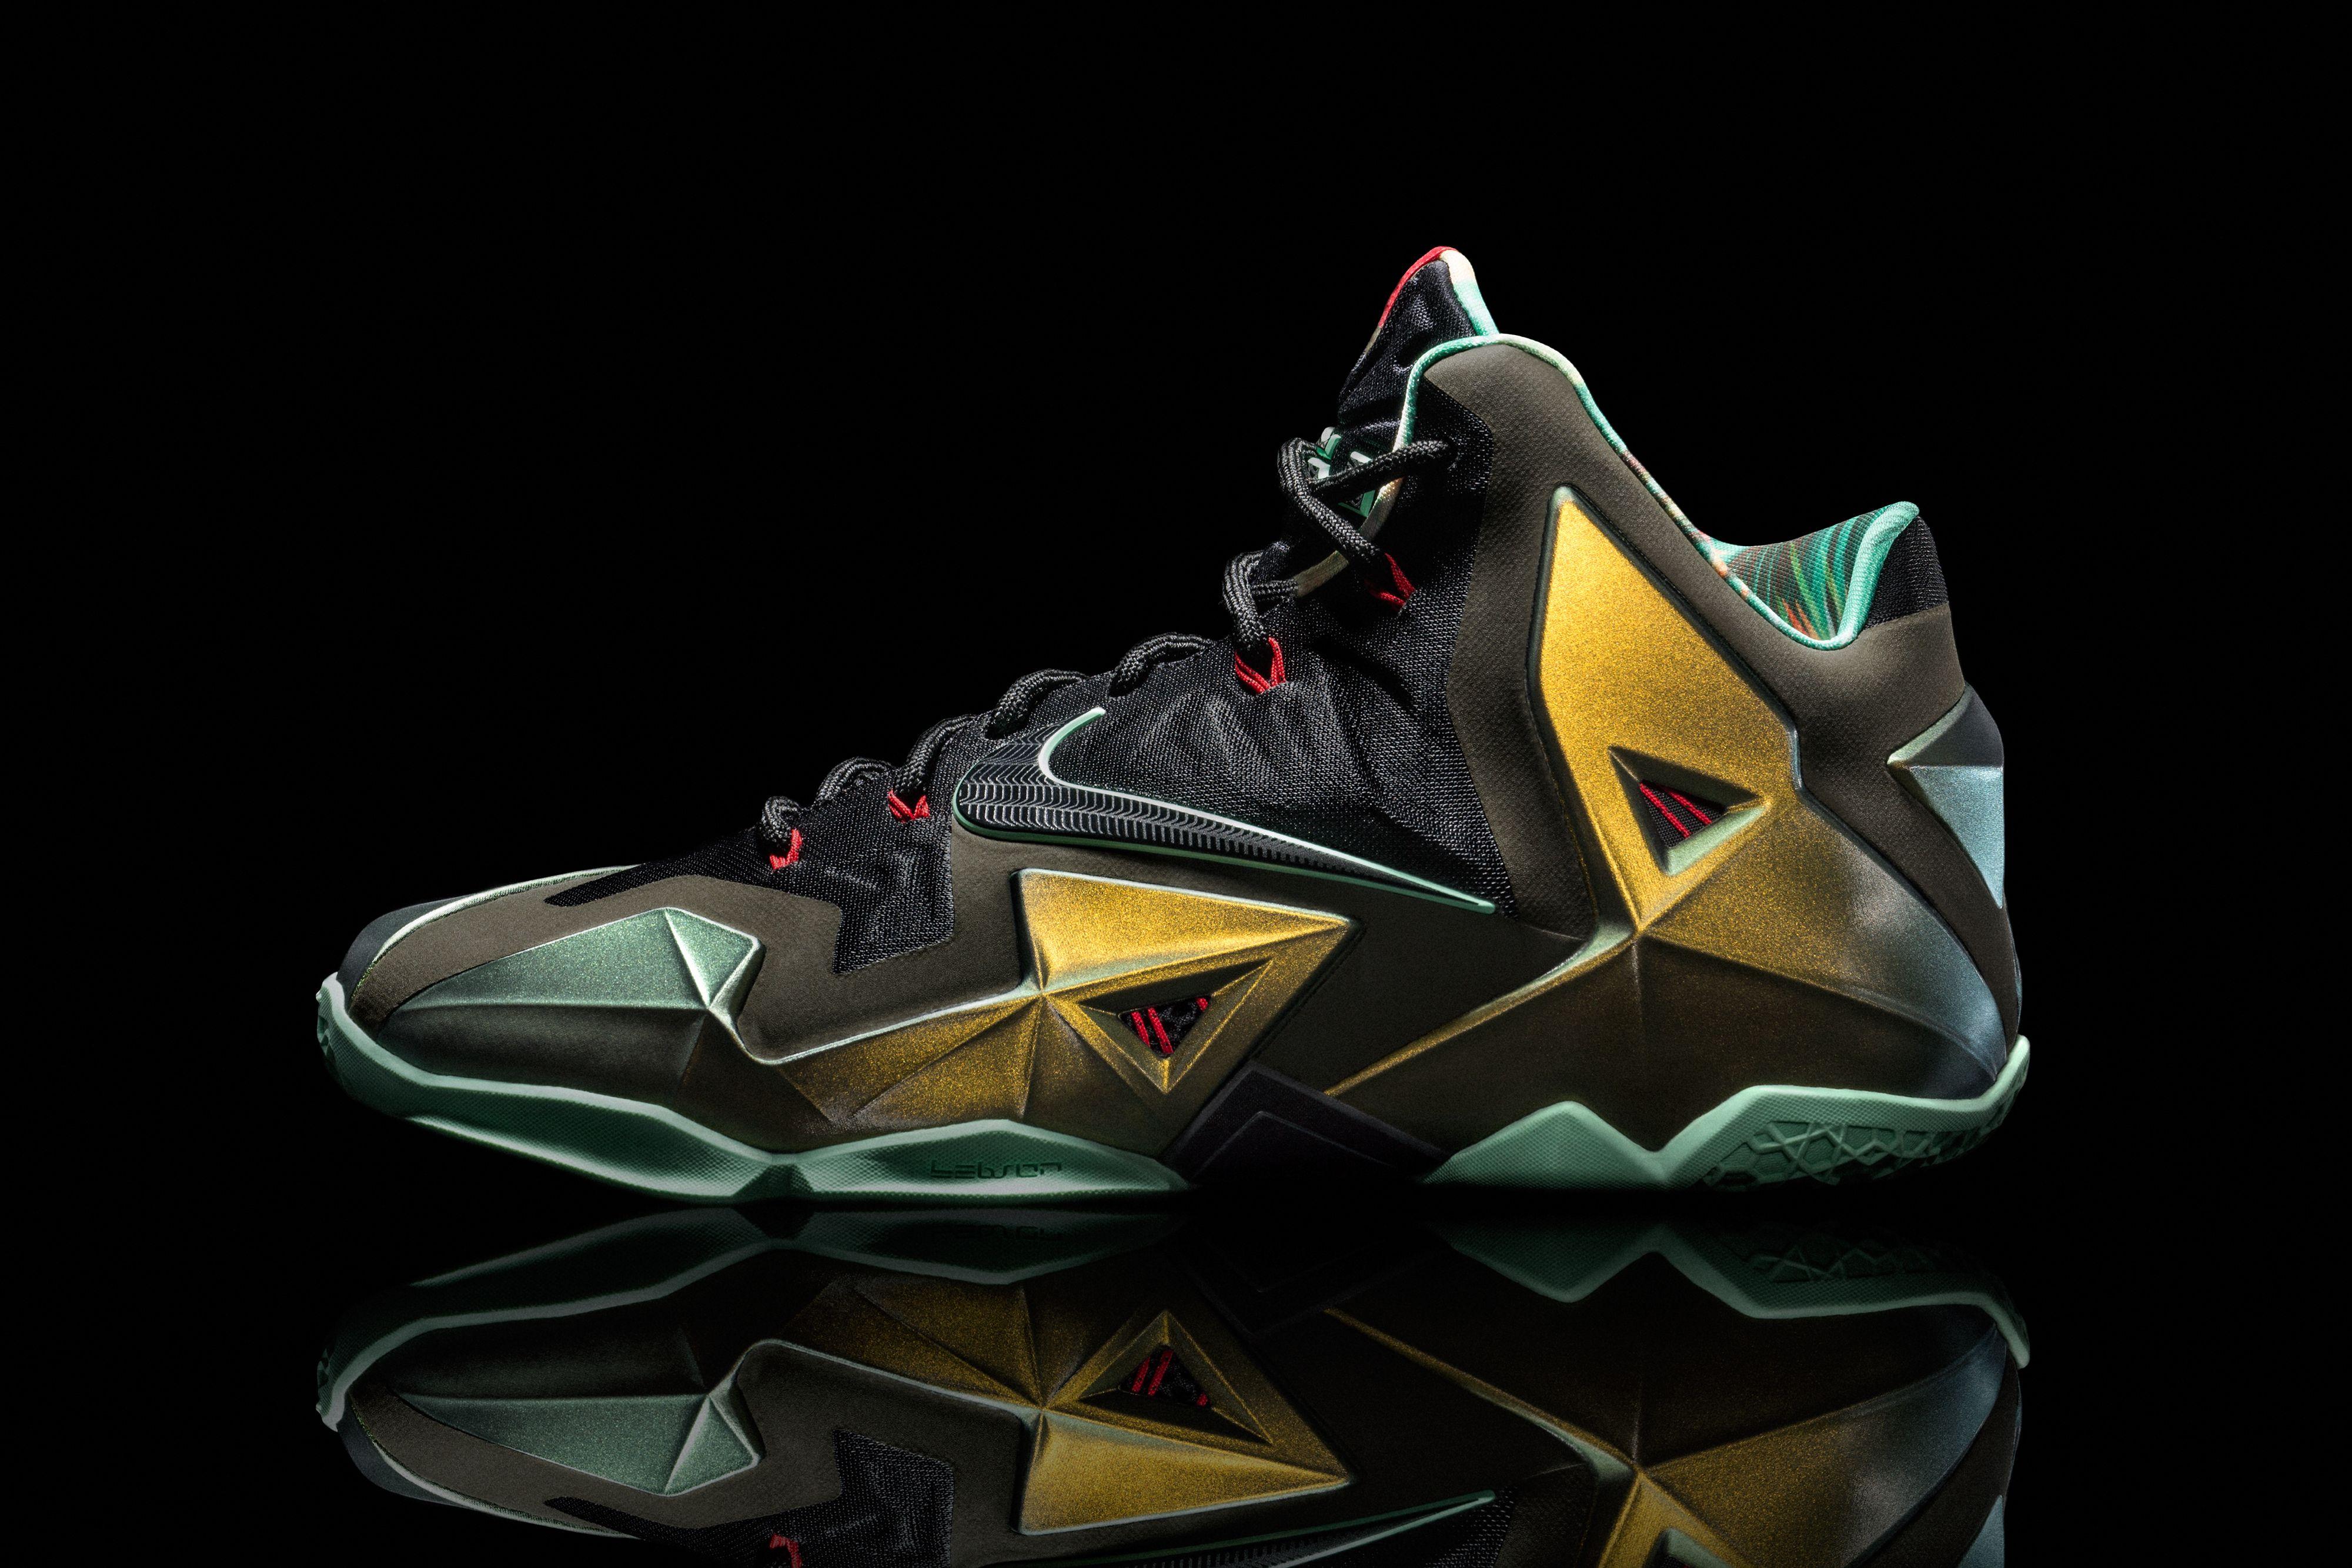 LEBRON 11 Provides a Protective Suit for LeBron James's Powerful